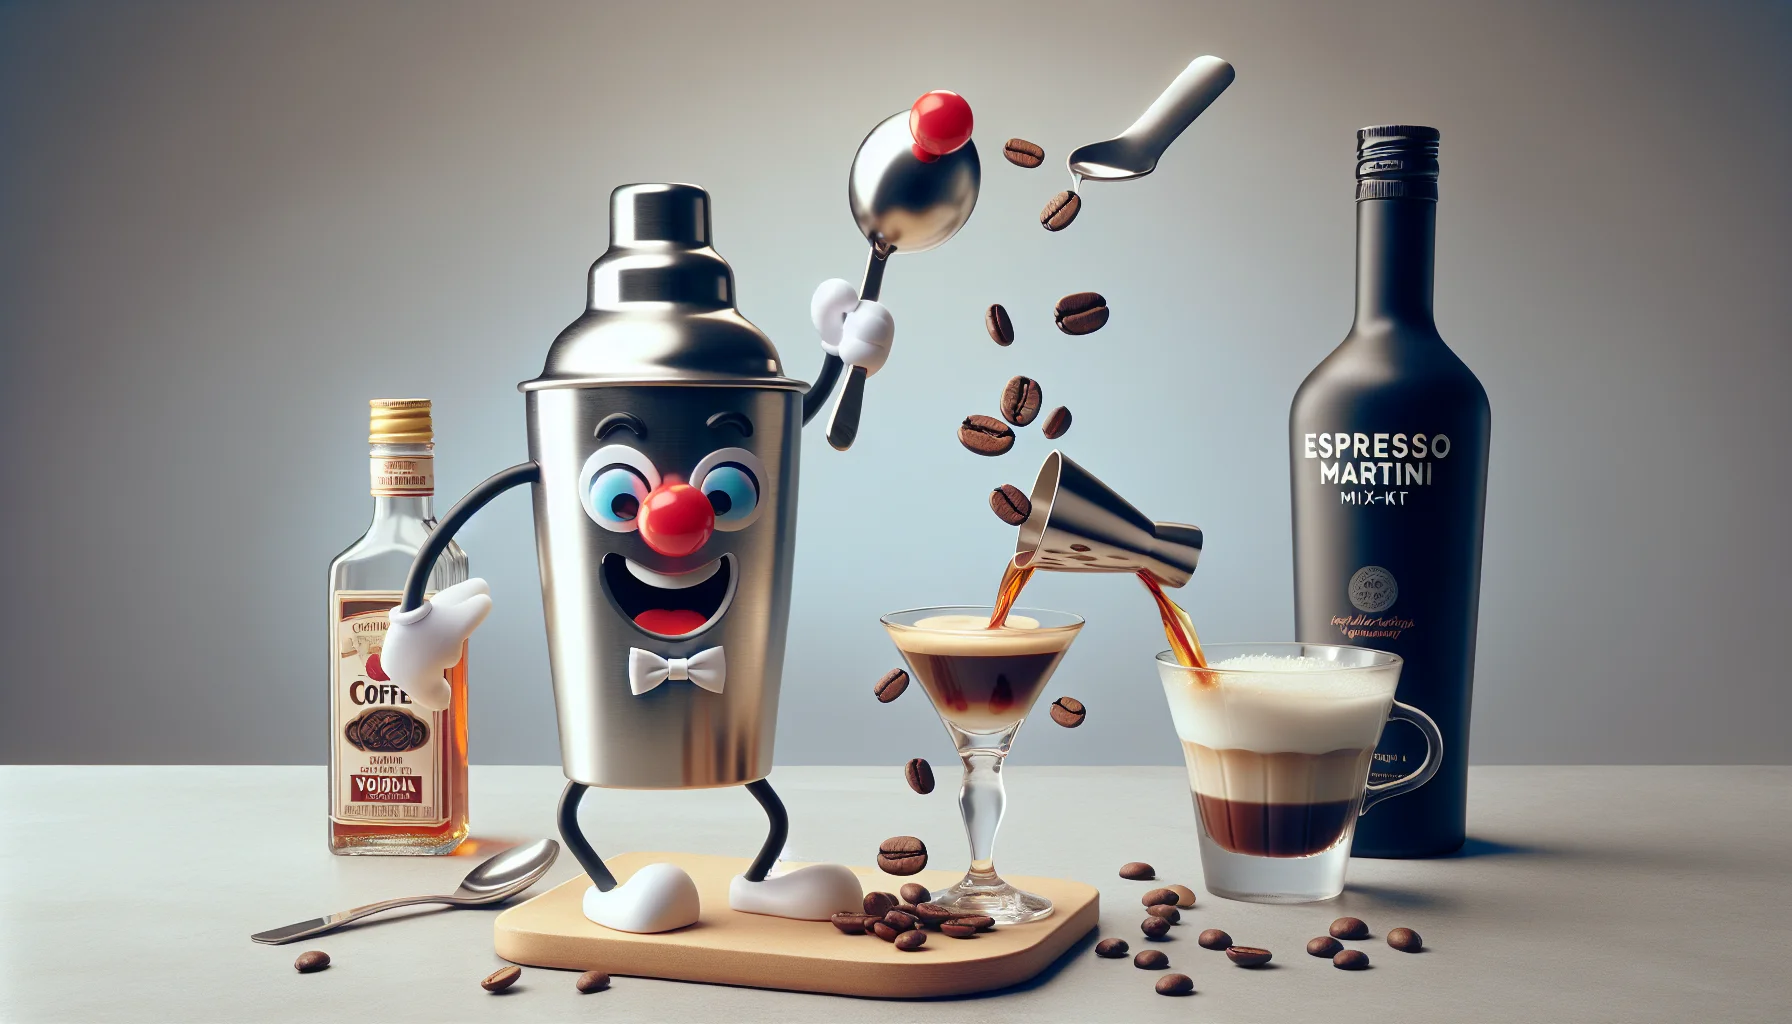 A creative and amusing scenario consists of an espresso martini mix-kit that has become animated. The kit includes a playful cocktail shaker wearing a clown nose and a bow tie, joyfully shaking as it prepares the cocktail. Beside it, stands a bottle of coffee liqueur and vodka, both smirking as they pour themselves into the shaker. The spoon triumphantly stirs the cocktail, while the espresso beans jump into the cup, as if they were diving into a pool. The scene embodies a lively atmosphere, making it an inviting and fun situation for people to engage with and enjoy making their espresso martini.